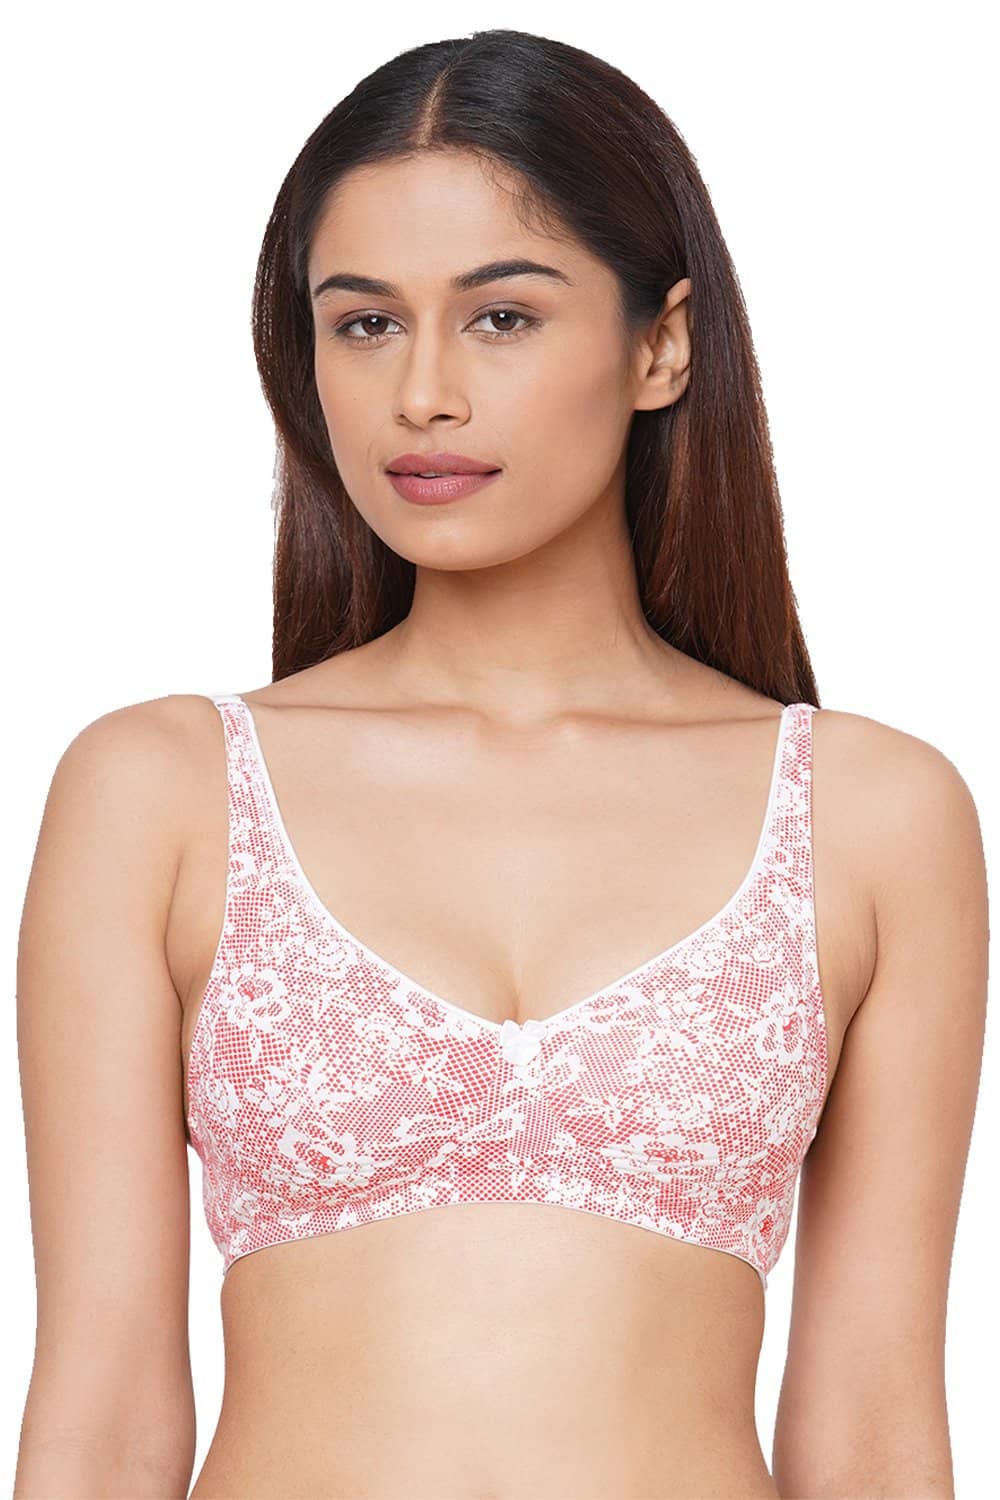 Organic Cotton  Antimicrobial  Seamless Side Support Bra-ISB057-Pink Lace Print-